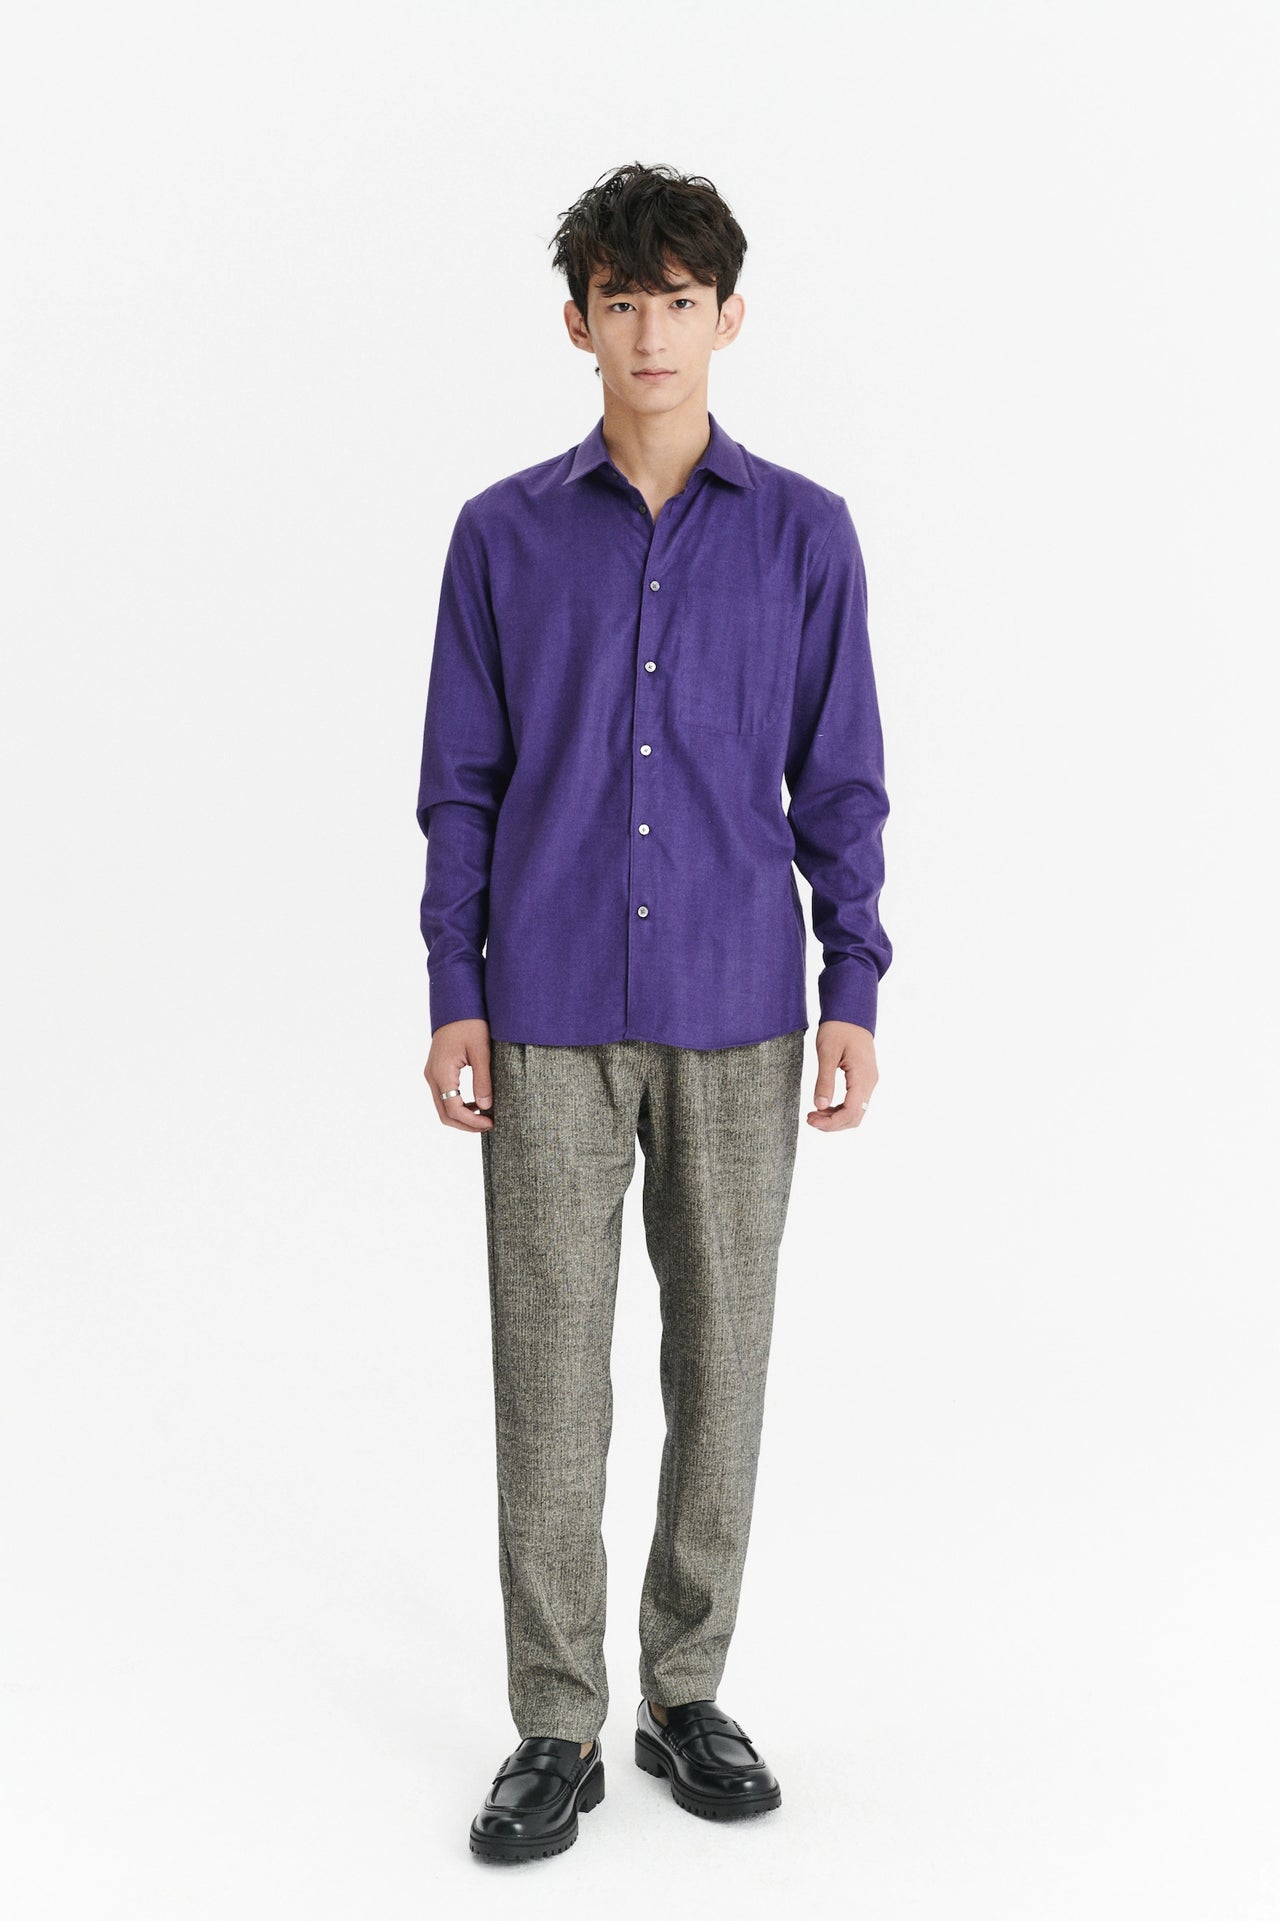 Feel Good Shirt in a Purple Uniquely Soft Italian Lyocell and Cotton Flannel